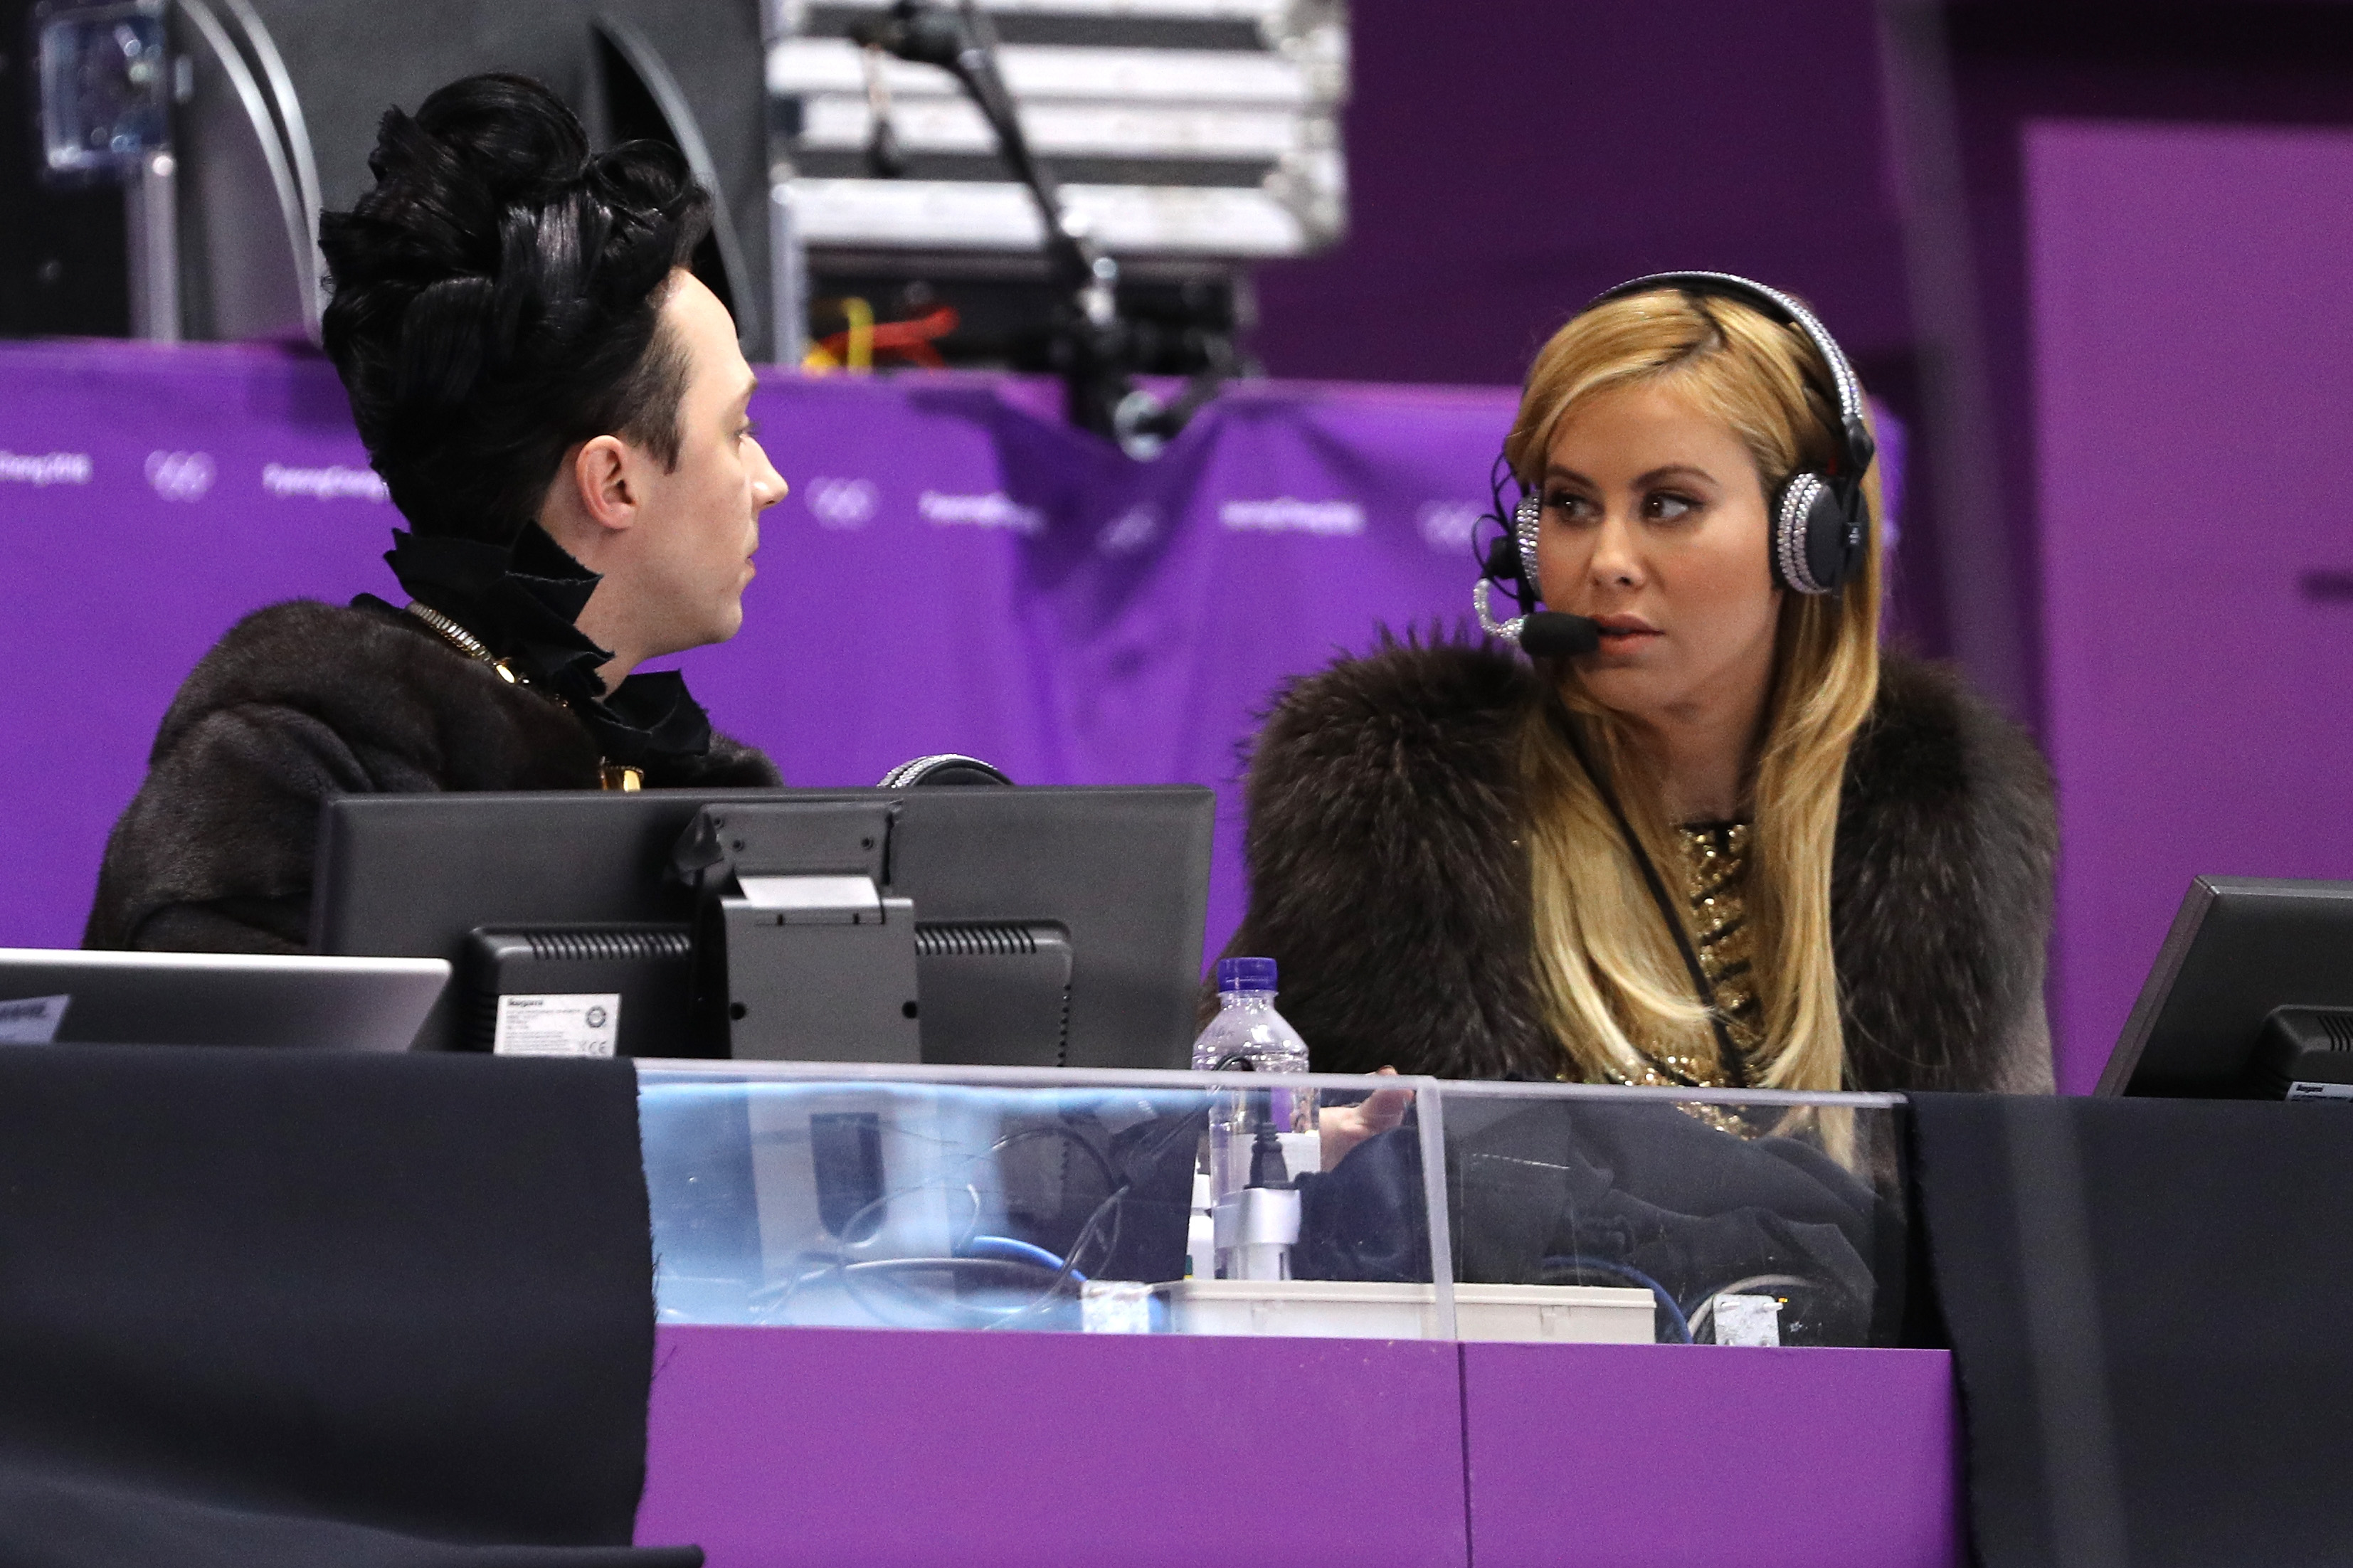 TV personalities and former figure skaters Johnny Weir and Tara Lipinski look on during the Ladies Single Skating Short Program on day twelve of the PyeongChang 2018 Winter Olympic Games at Gangneung Ice Arena on February 21, 2018 in Gangneung, South Korea.